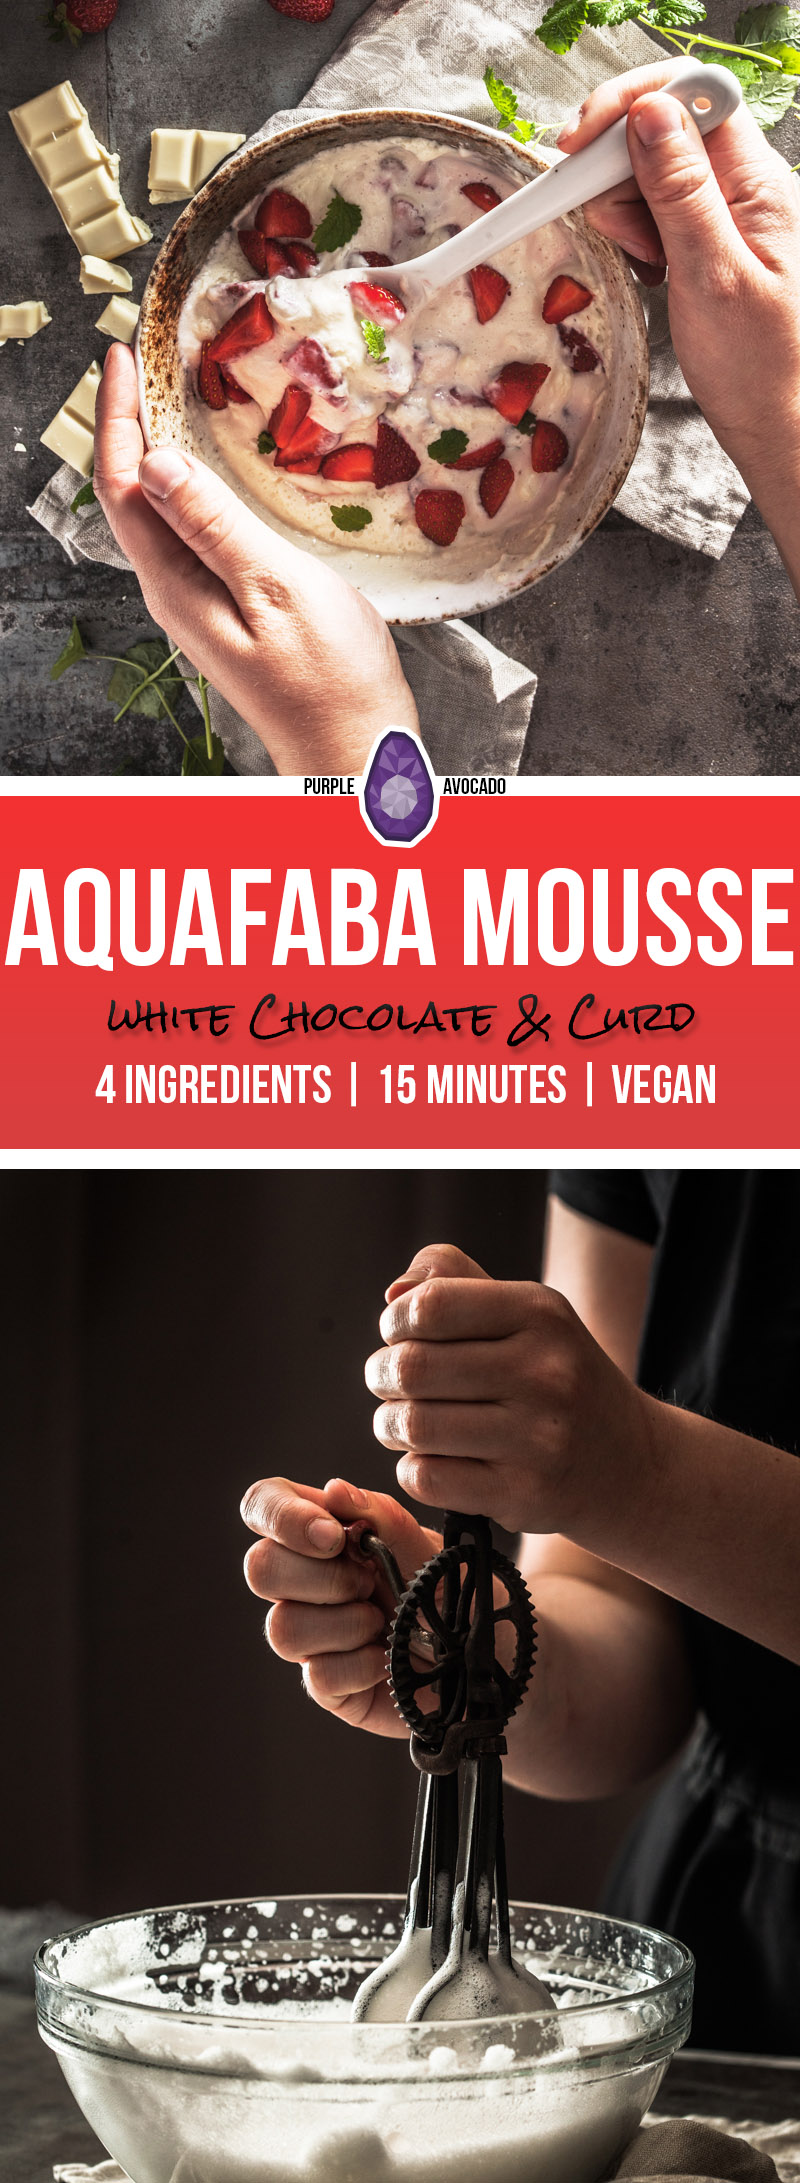 There are plenty of aquafaba recipes. But this 4 ingredients summer recipe for a fruity, light curd / yogurt mousse with white chocolate, strawberries and aquafaba is new and exciting.